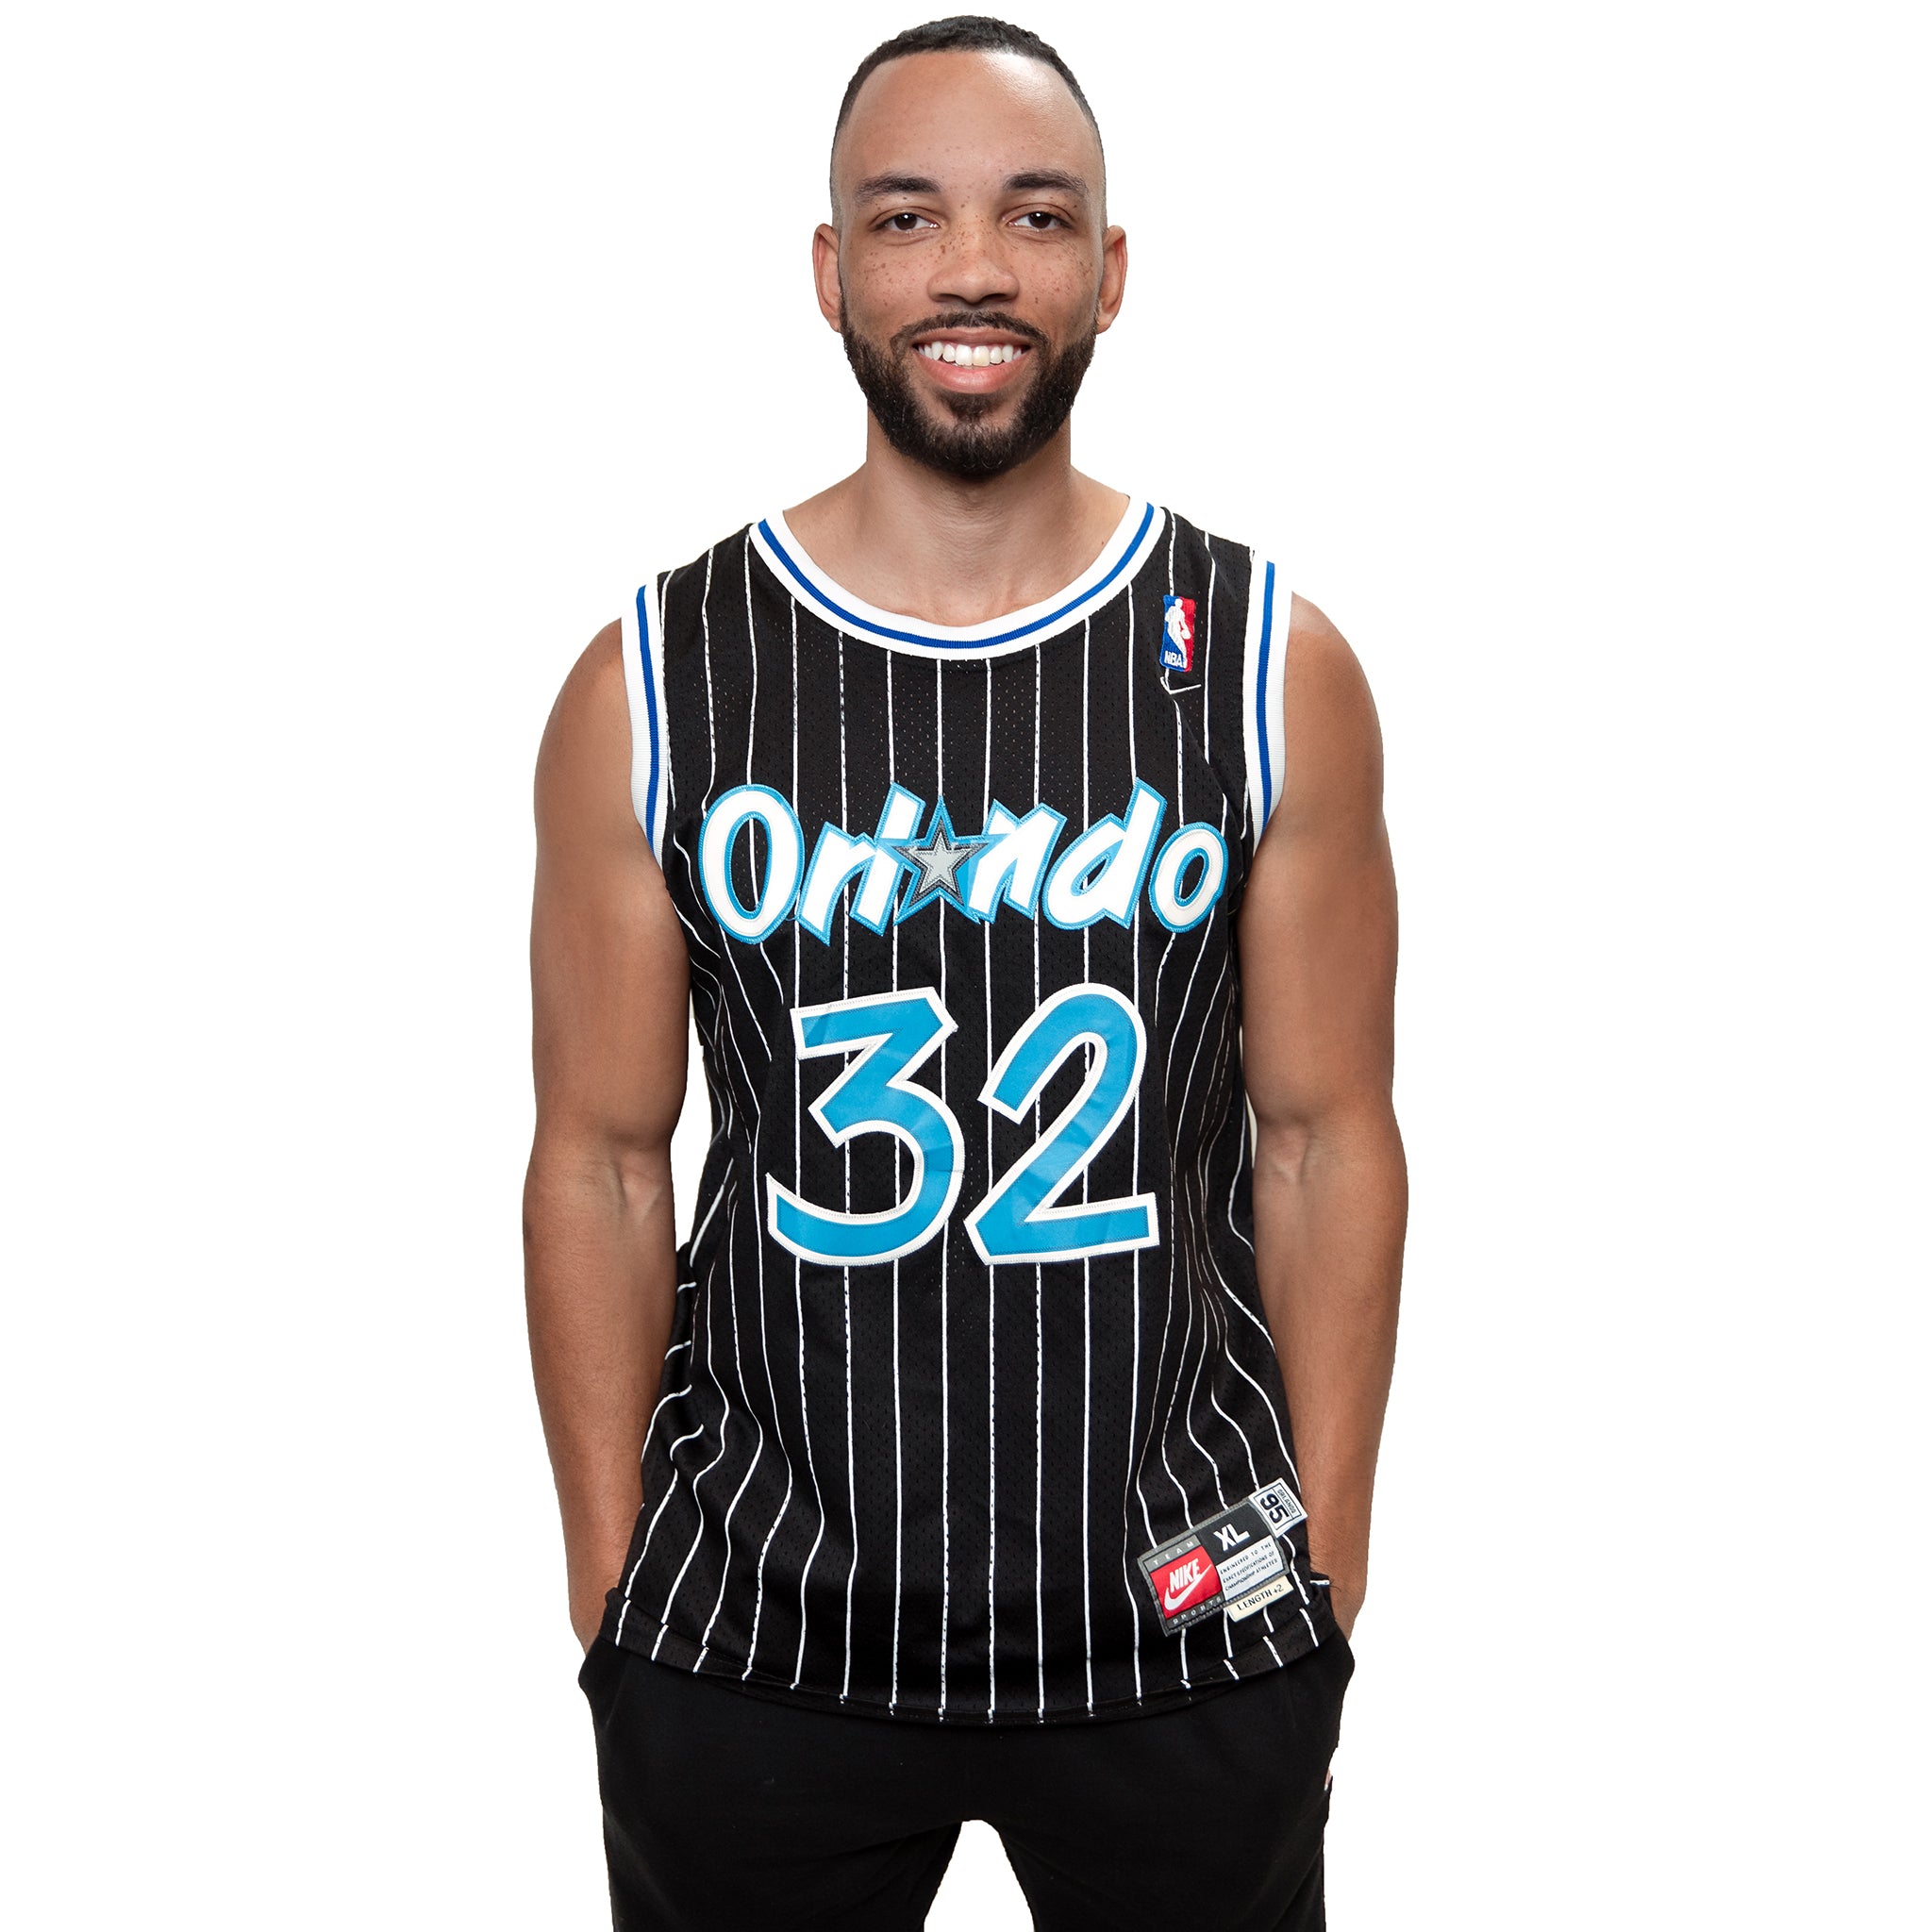 shaquille o neal jersey amazon